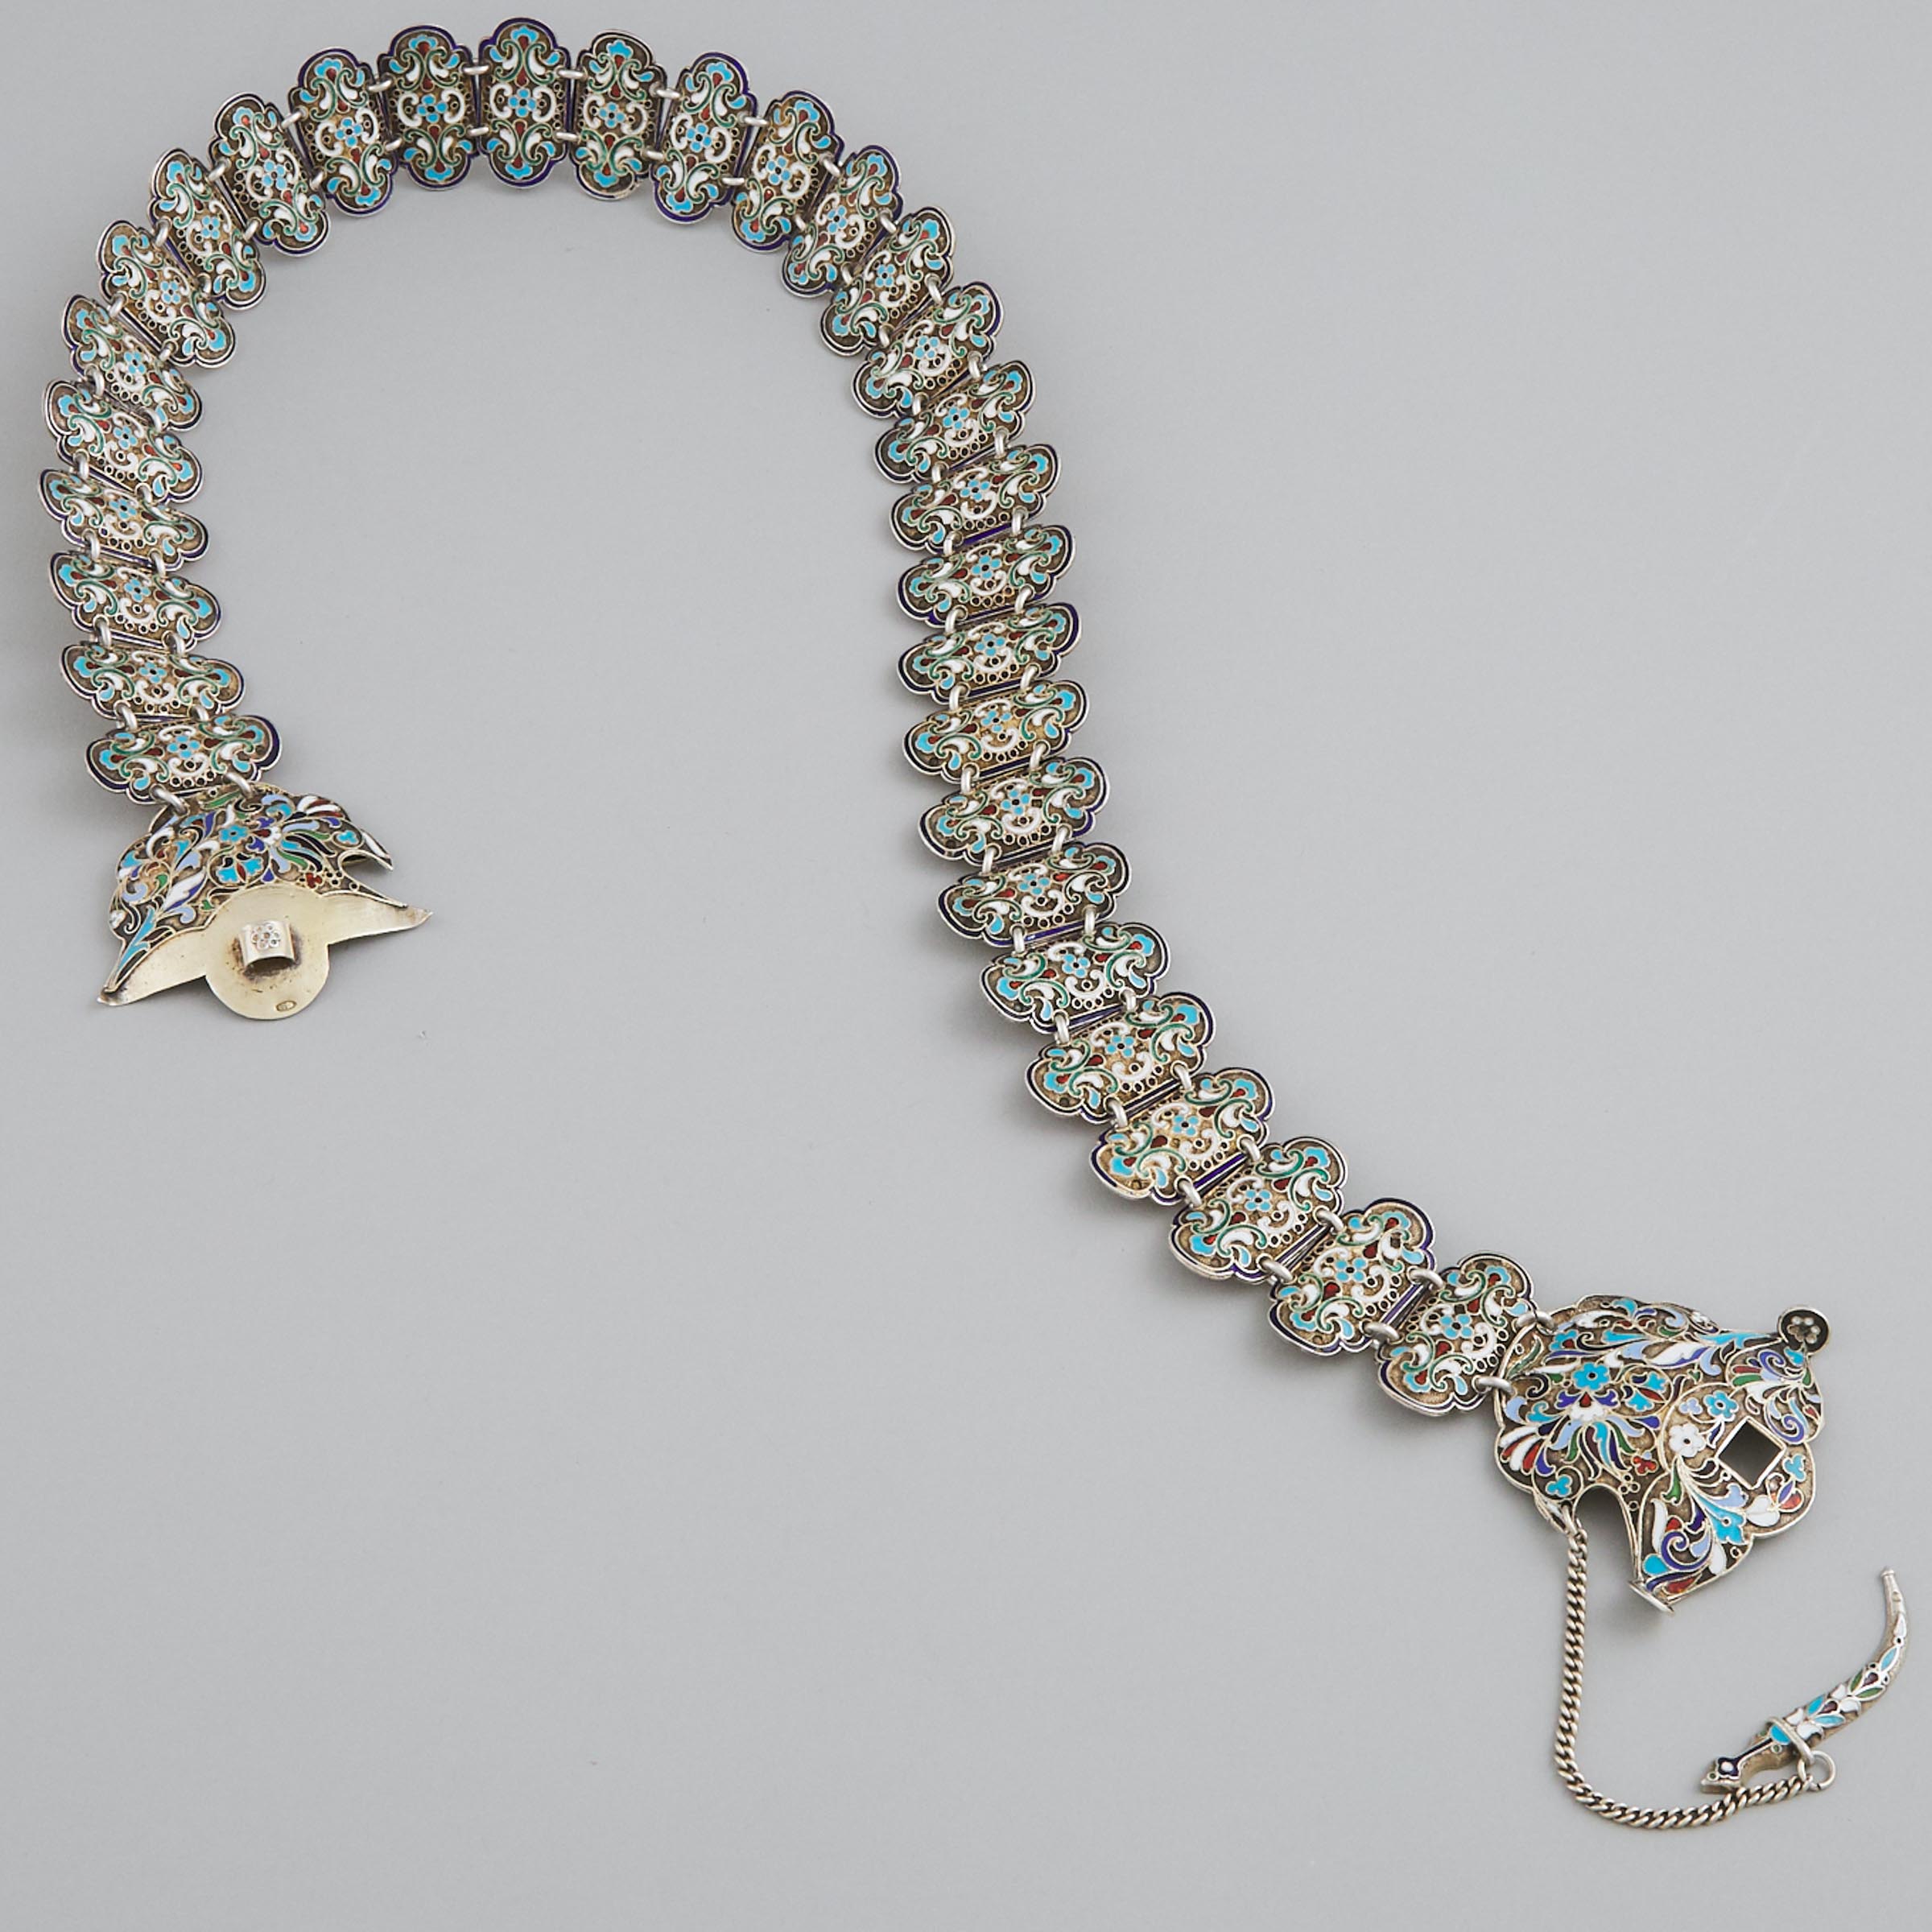 Russian Silver and Cloisonné Enamel Belt, Moscow, c.1908-17